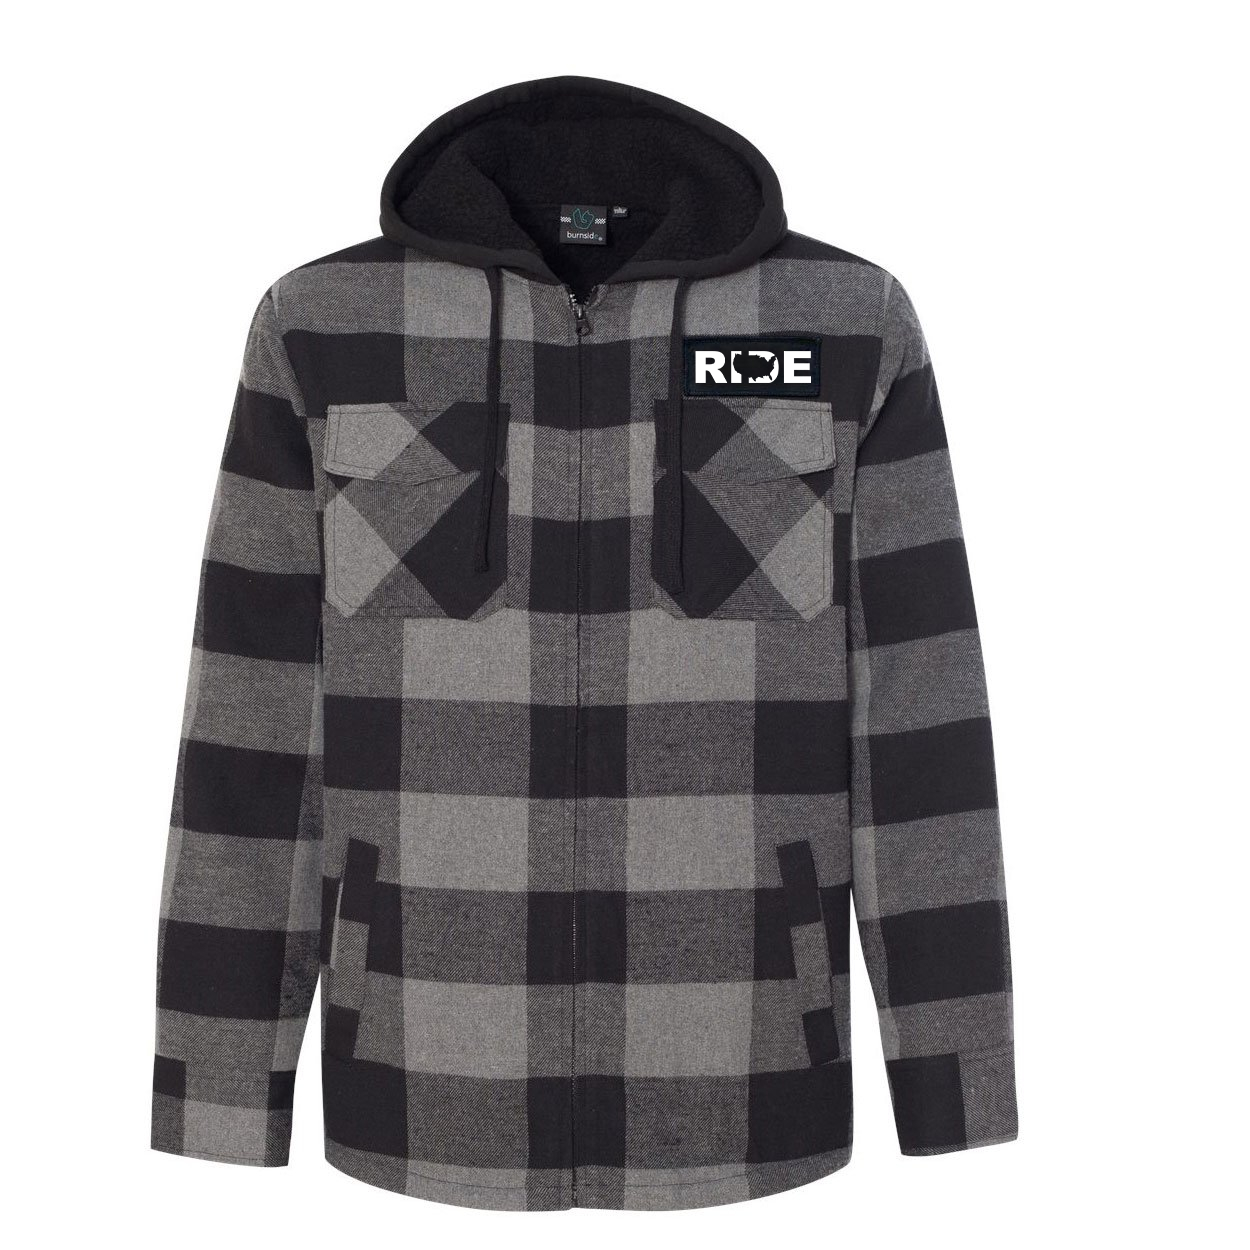 Ride United States Classic Unisex Full Zip Woven Patch Hooded Flannel Jacket Black/Gray (White Logo)